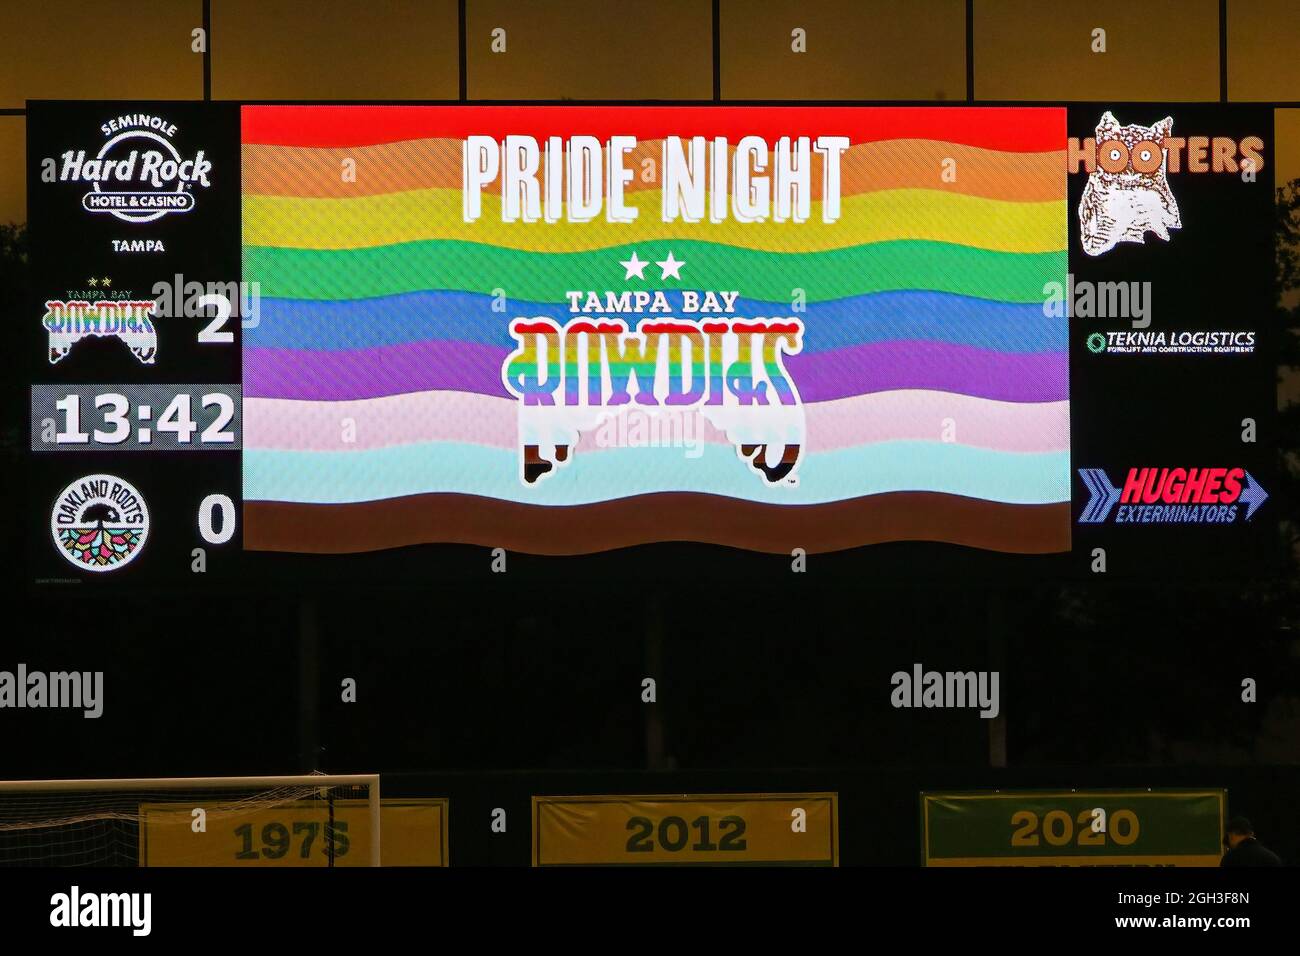 St. Petersburg, FL; The Tampa Bay Rowdies celebrated the Tampa Bay area's LGBTQ+ community at halftime during a USL soccer game against the Oakland Ro Stock Photo